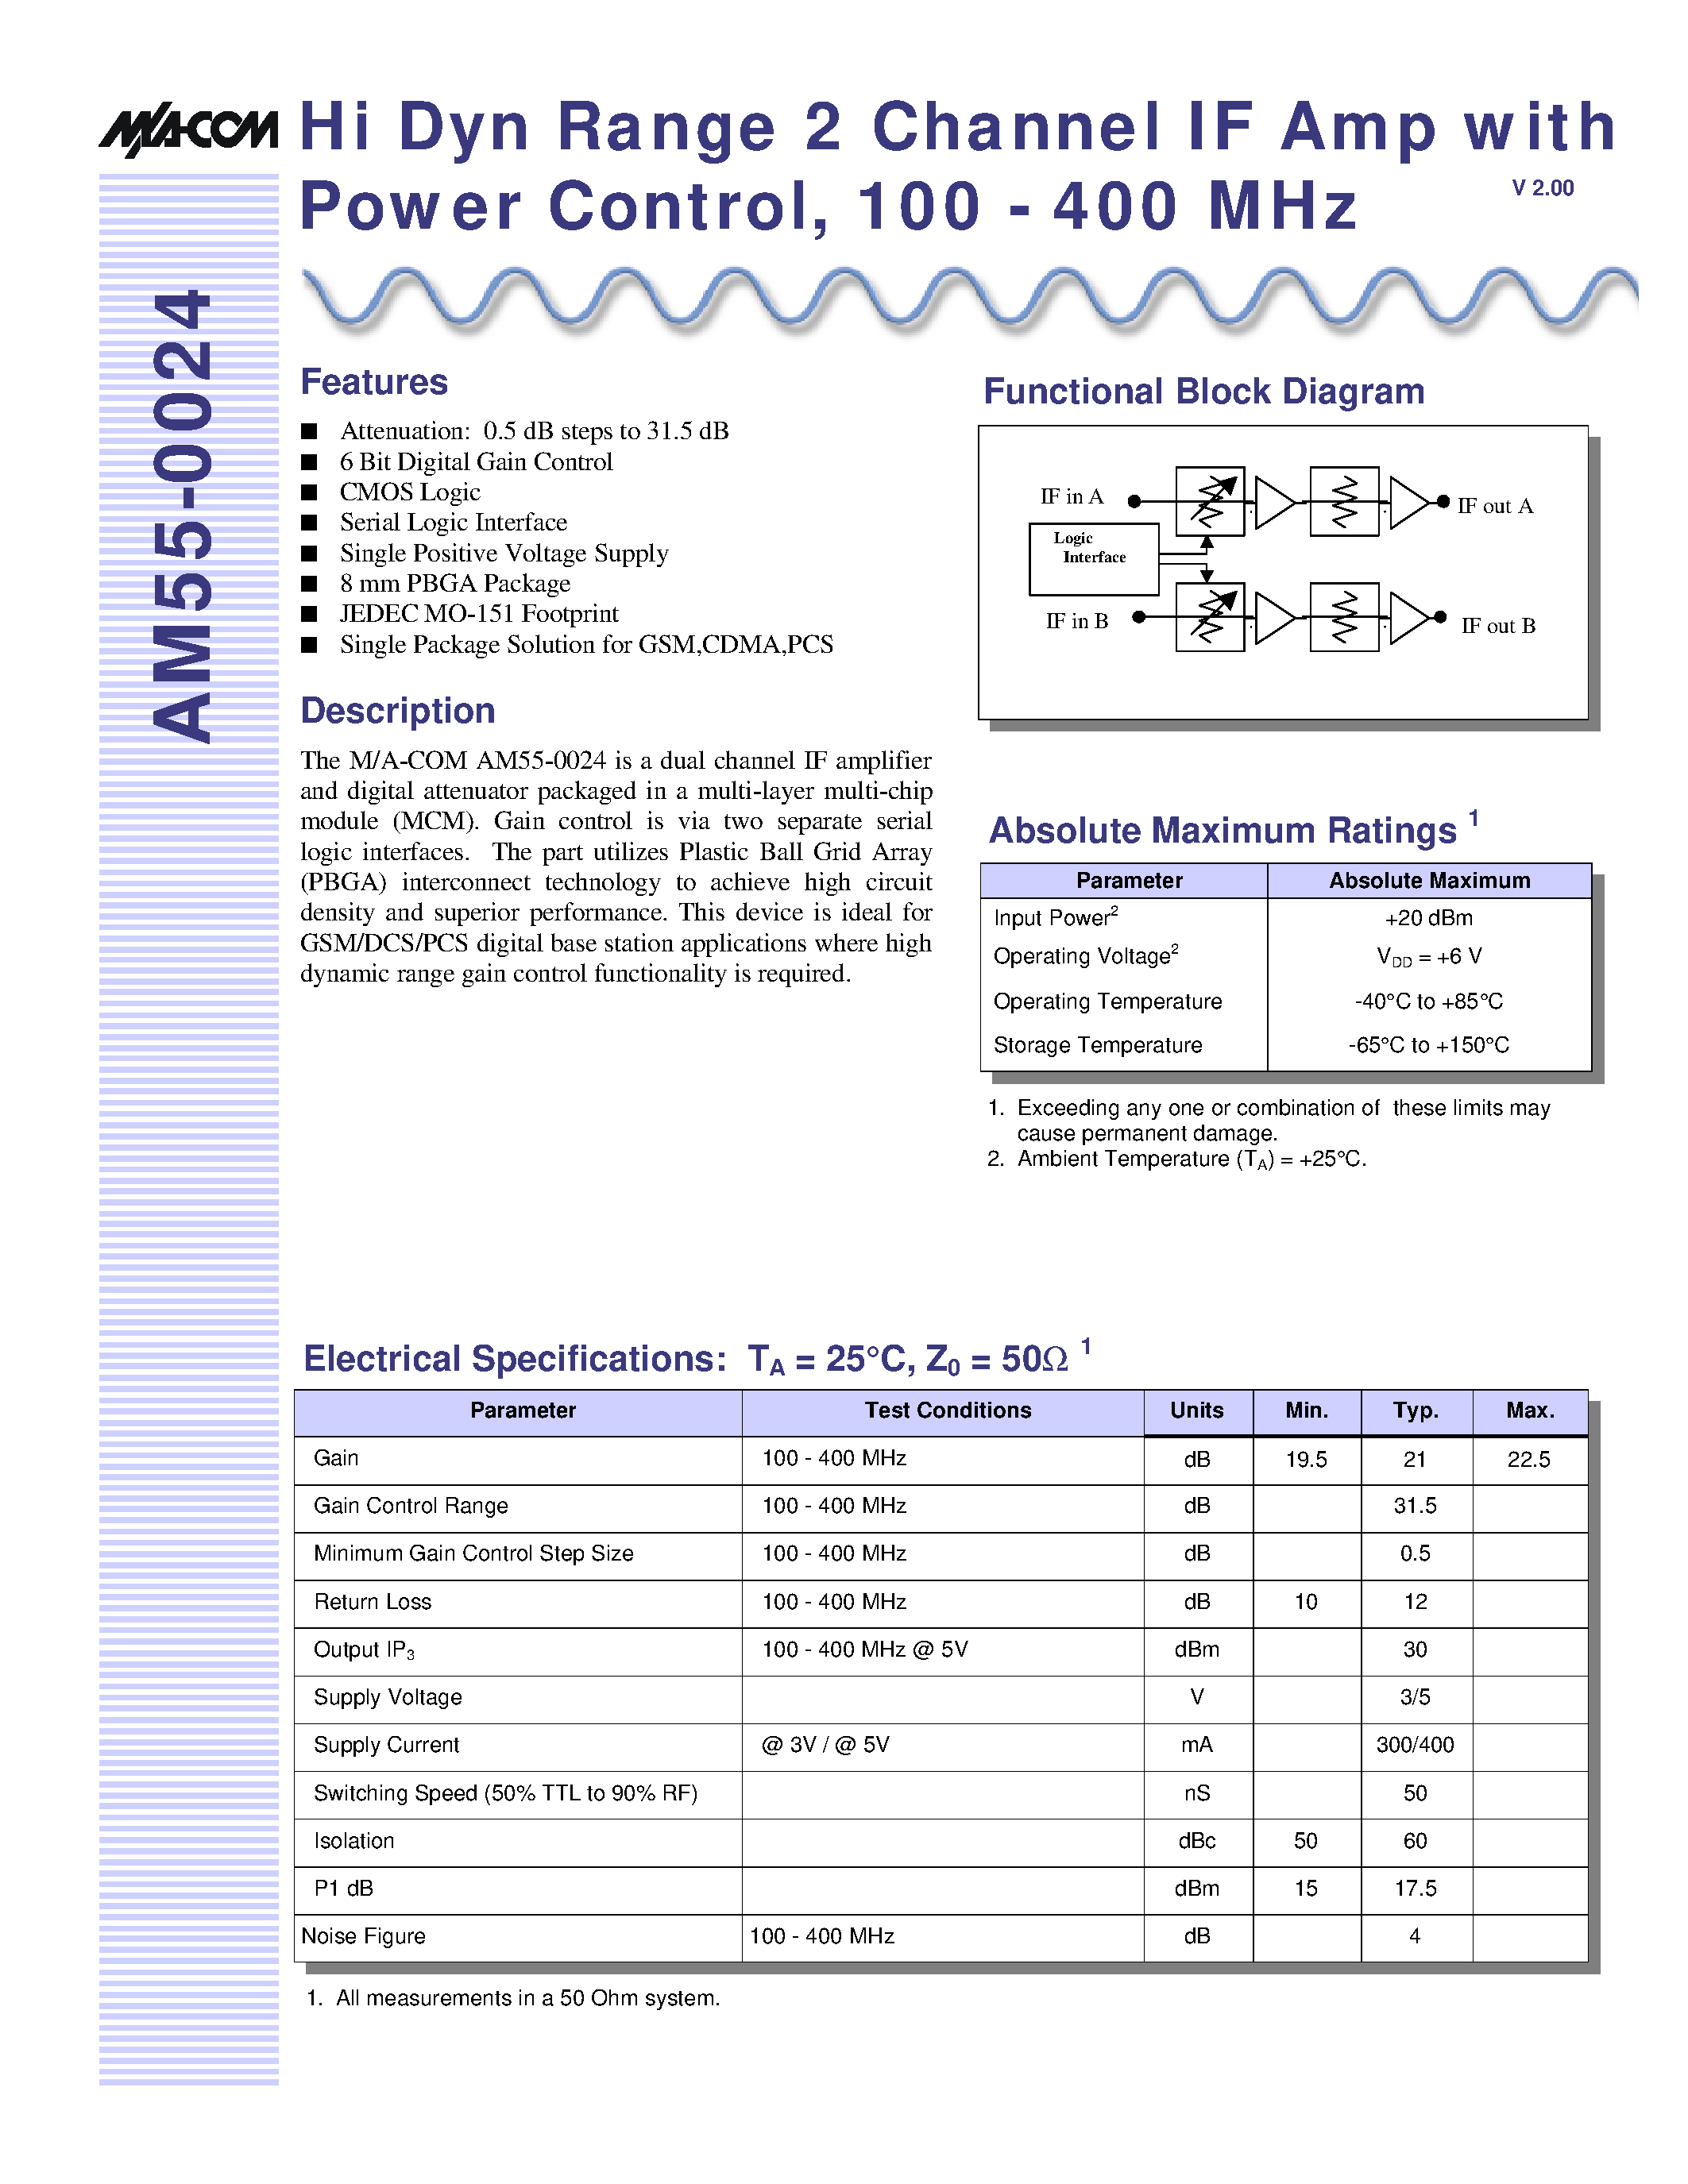 Datasheet AM55-0024TR - Hi Dyn Range 2 Channel IF Amp with Power Control/ 100 - 400 MHz page 1